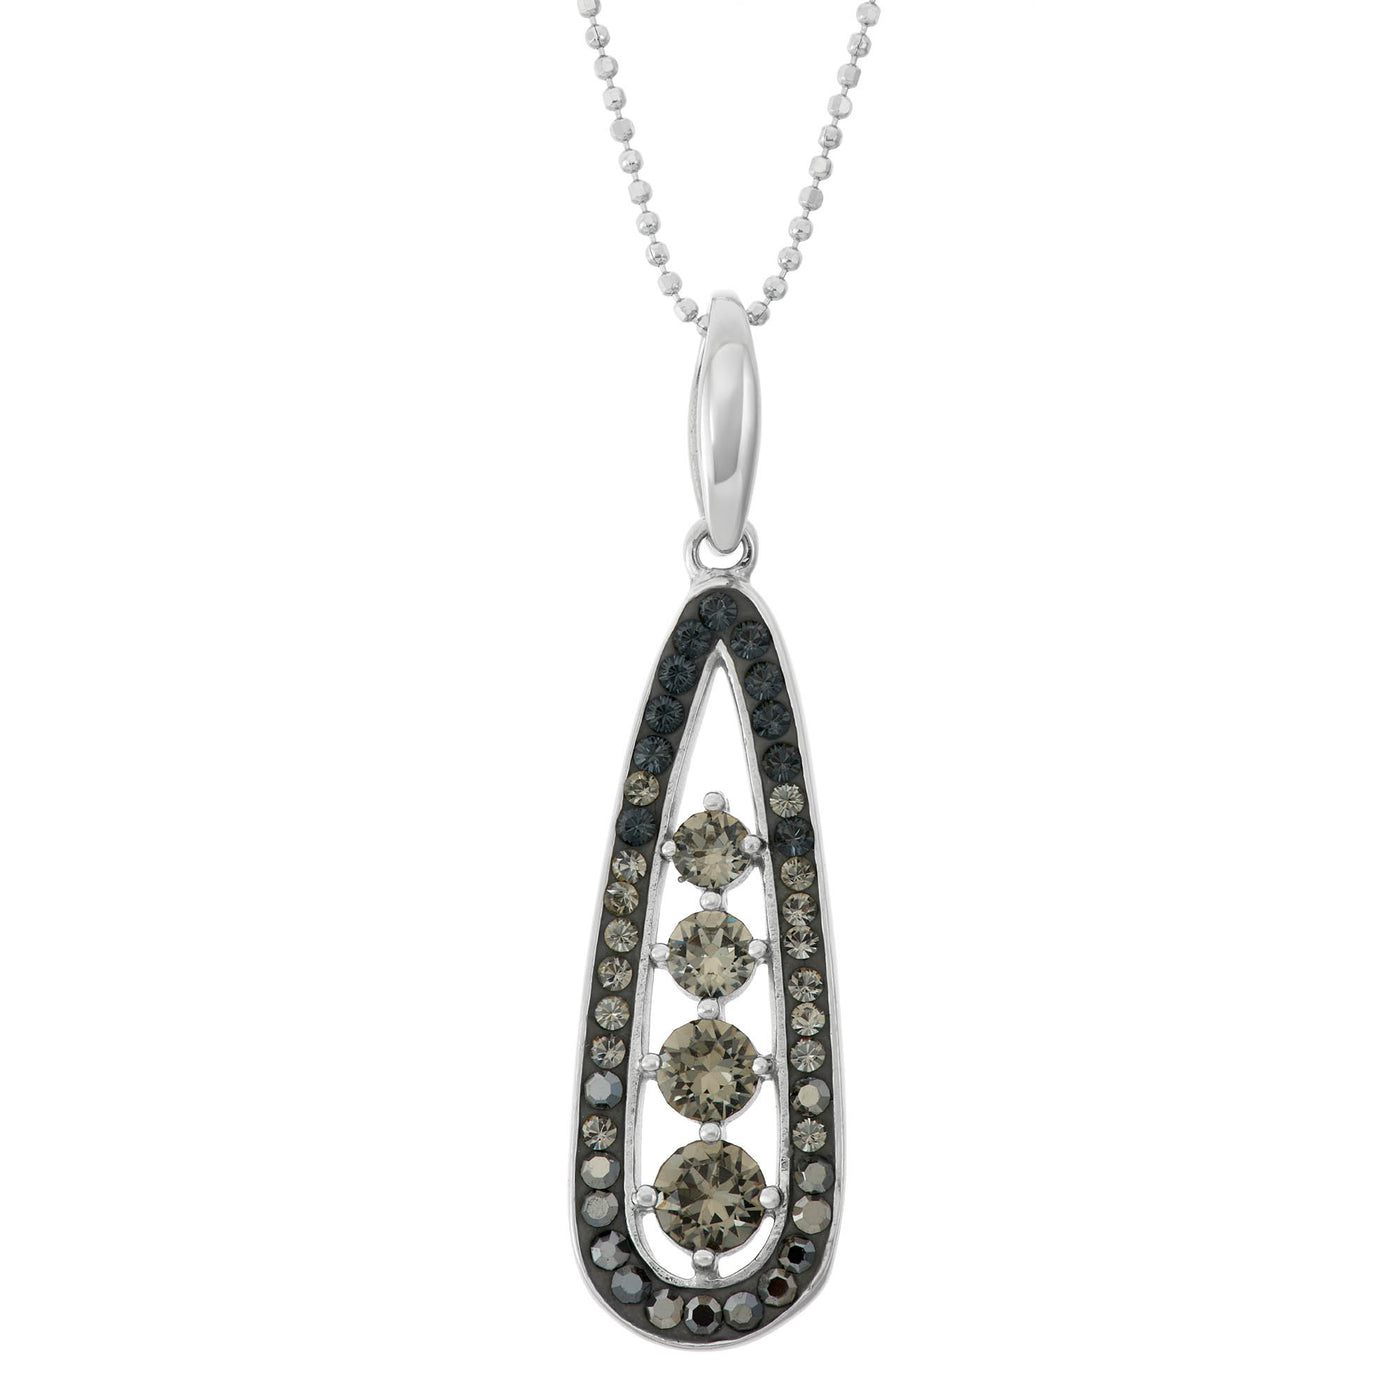 Rebecca Sloane Silver Pendant With Grey Shade Crystal